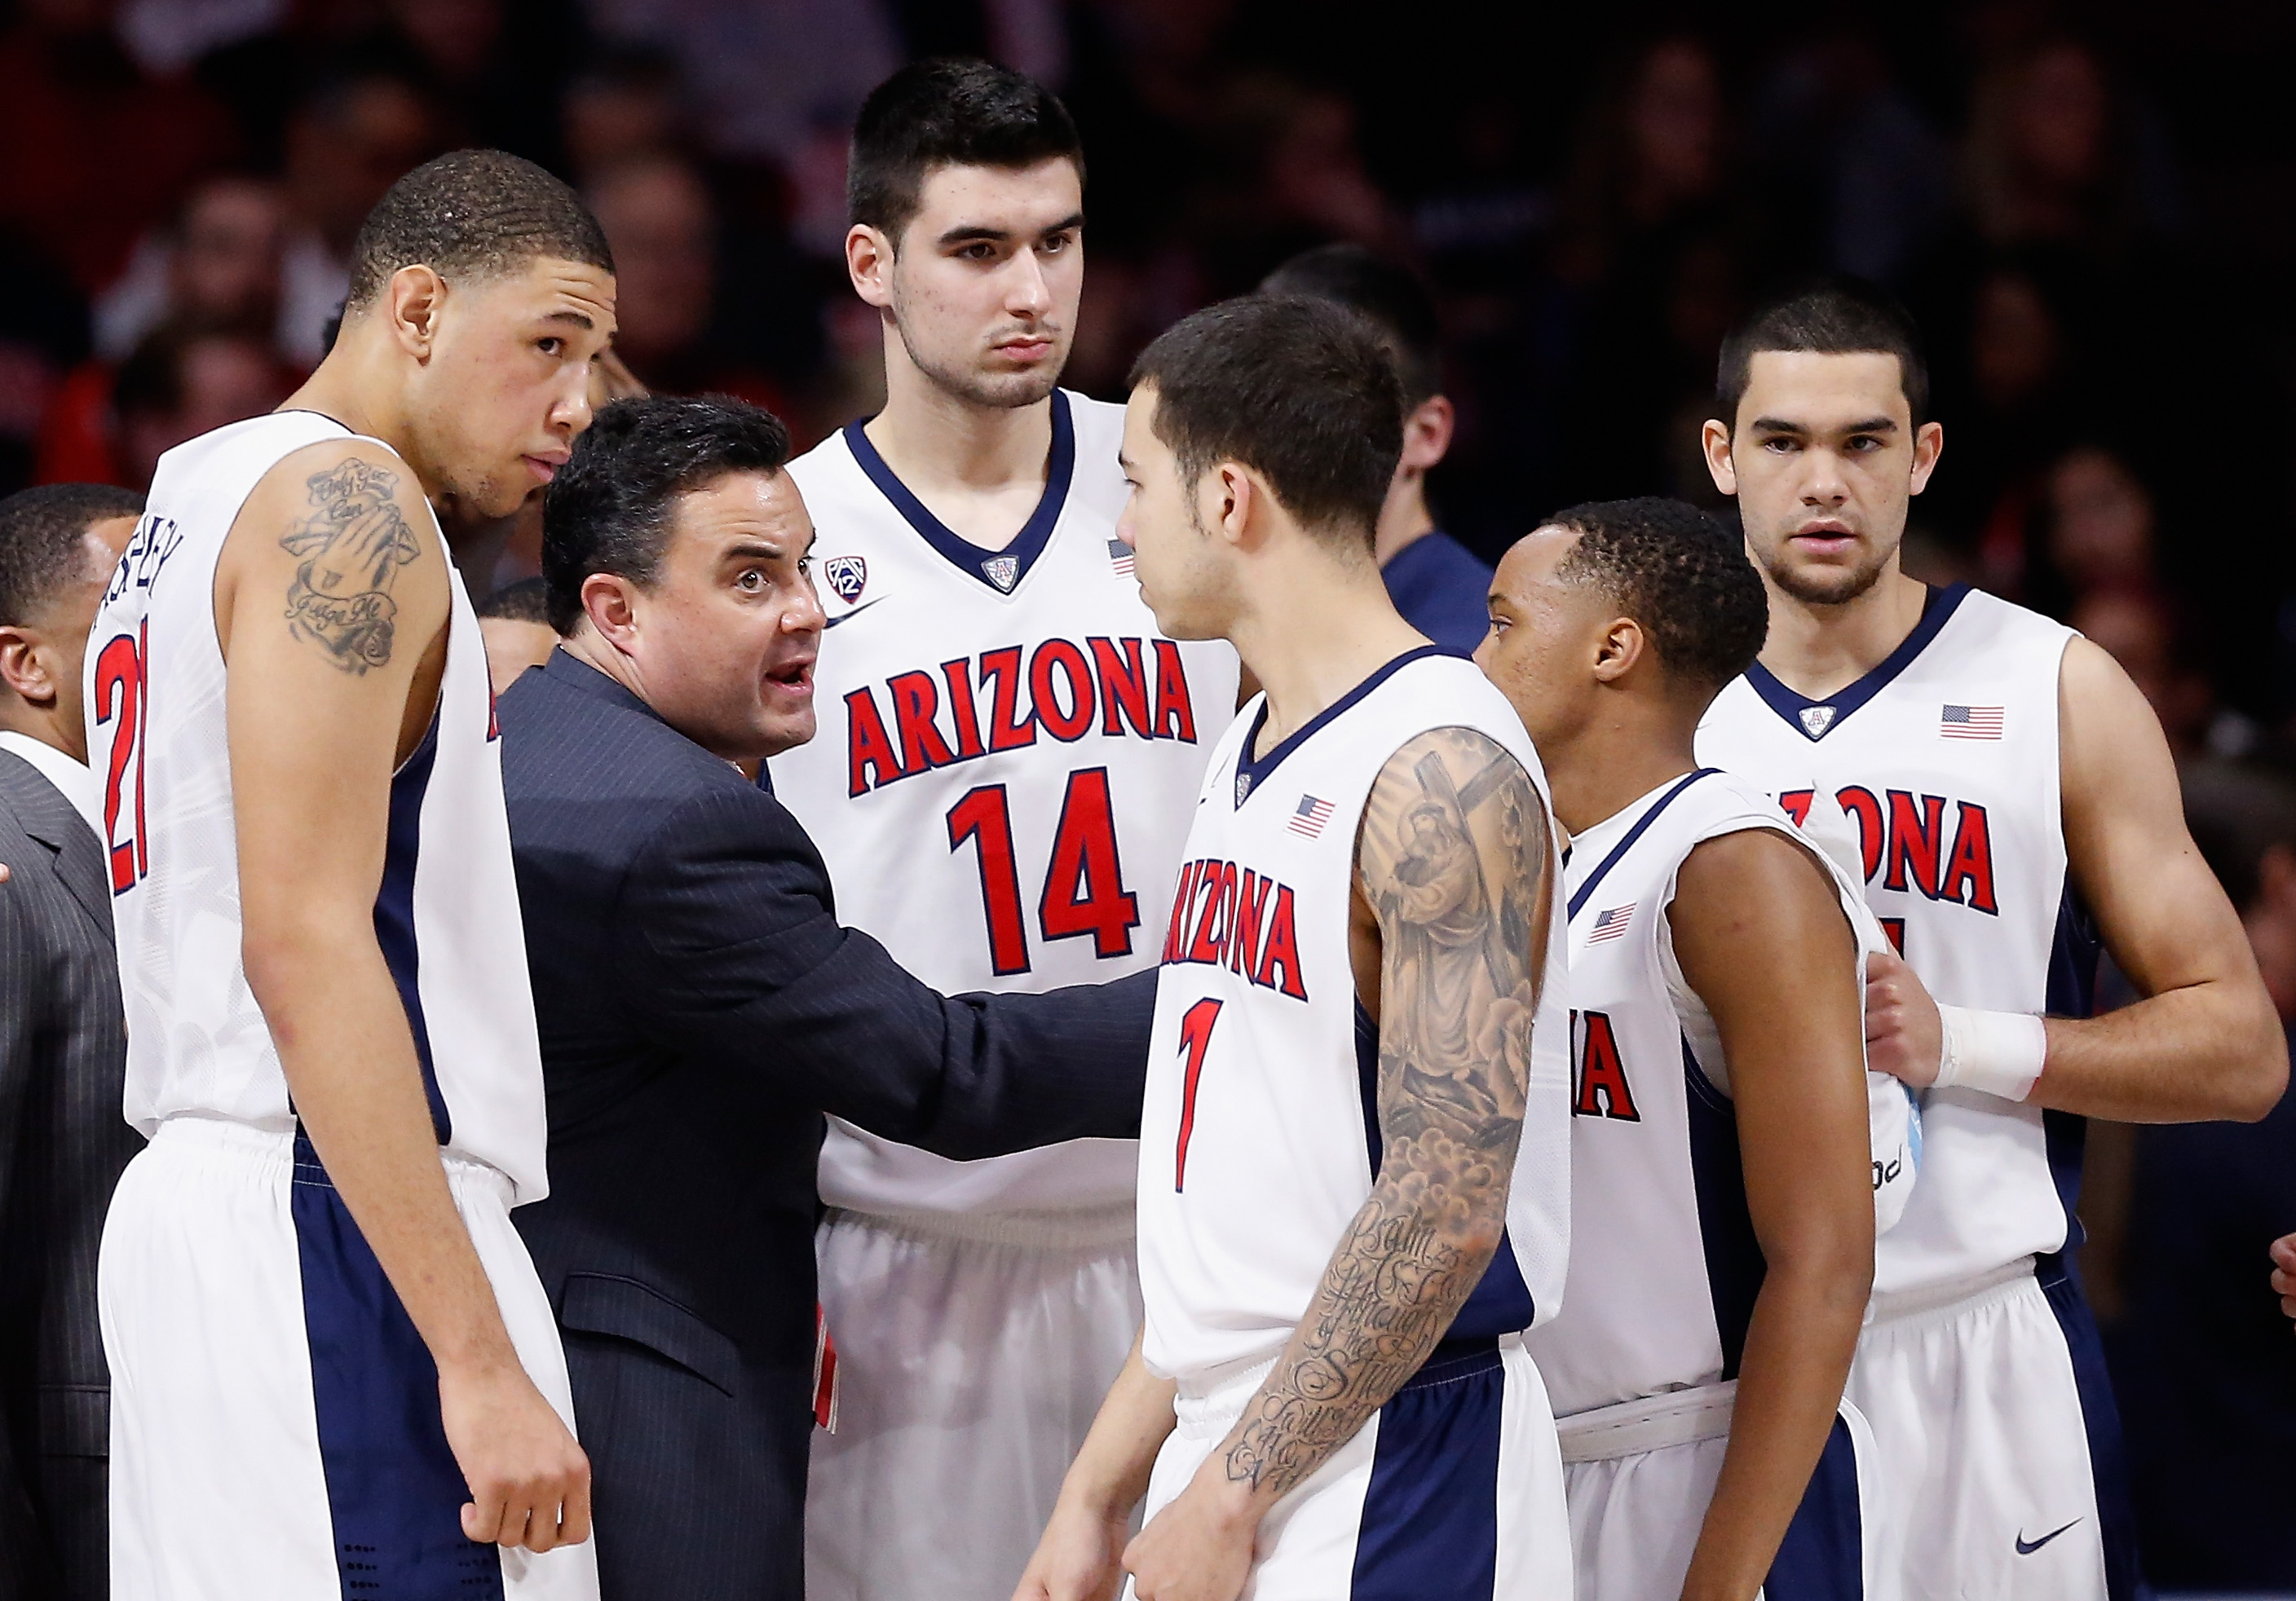 University of Arizona Wildcats 5 Fast Facts You Need to Know